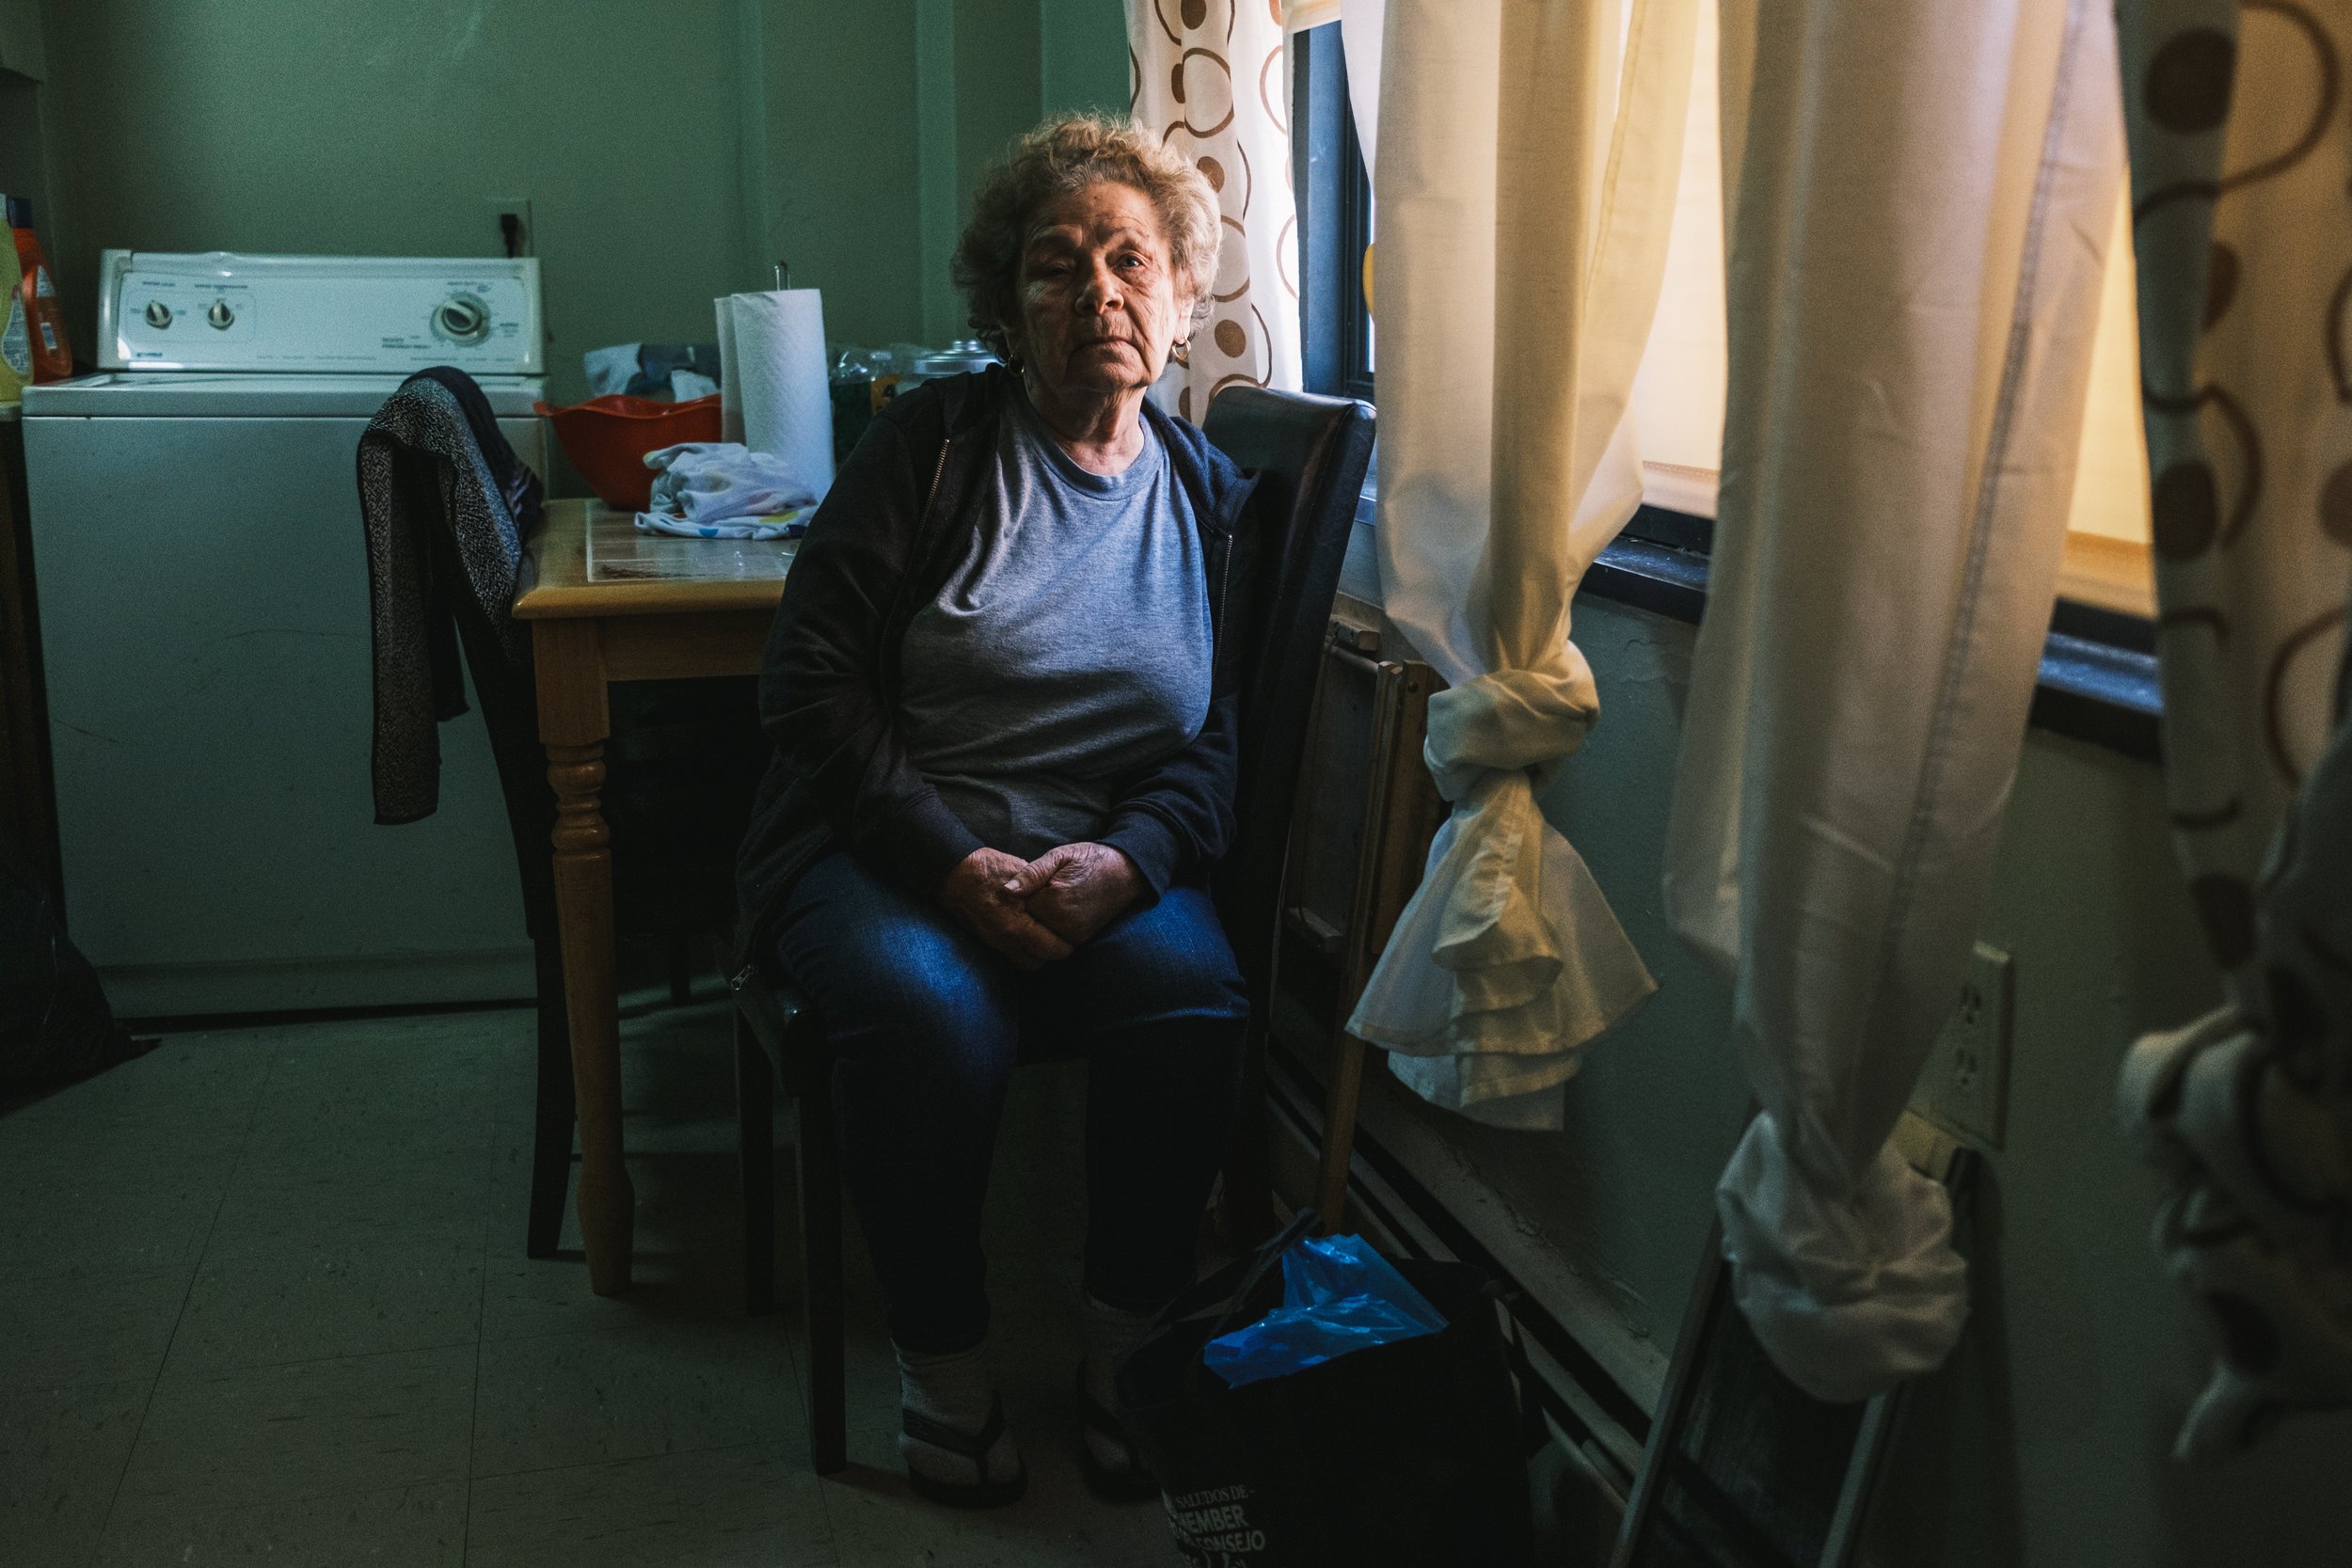  December 24, 2021 - Bronx, NY:  NYCHA resident Margarita Pabon, 83, in her apartment which has no heat. Pabon’s apartment building at the Bronx River Houses in the Bronx has not had heat in two weeks and despite multiple calls to the maintenance dep